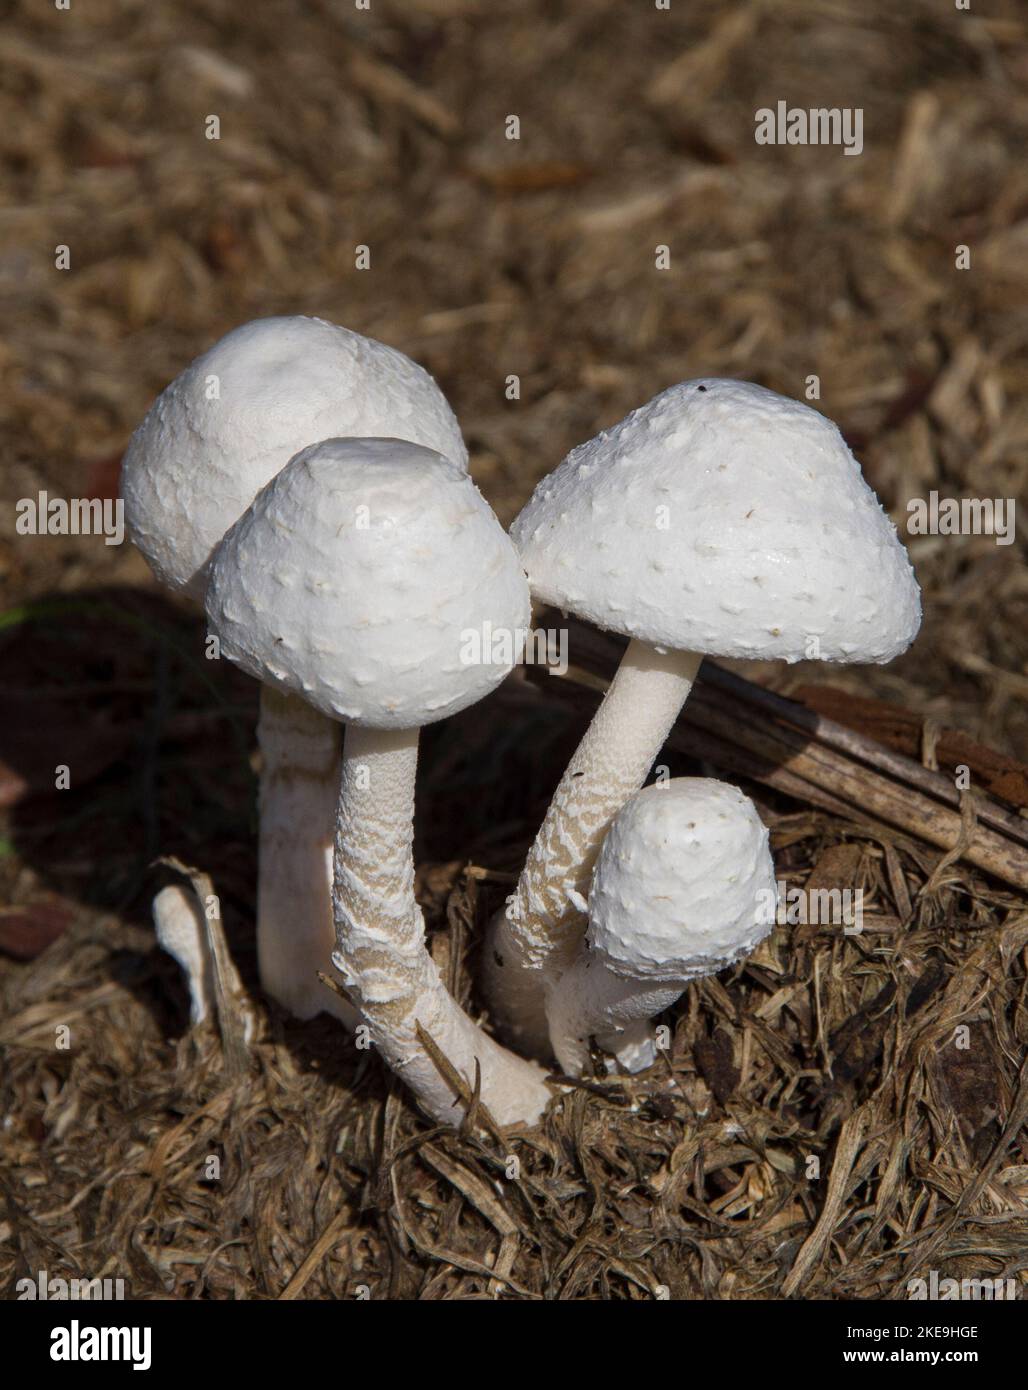 Group of White Parasol fungi, Macrolepiota dolichaula,growing in Queensland garden, Australia. Mushrooms have attractive textured surface. Stock Photo